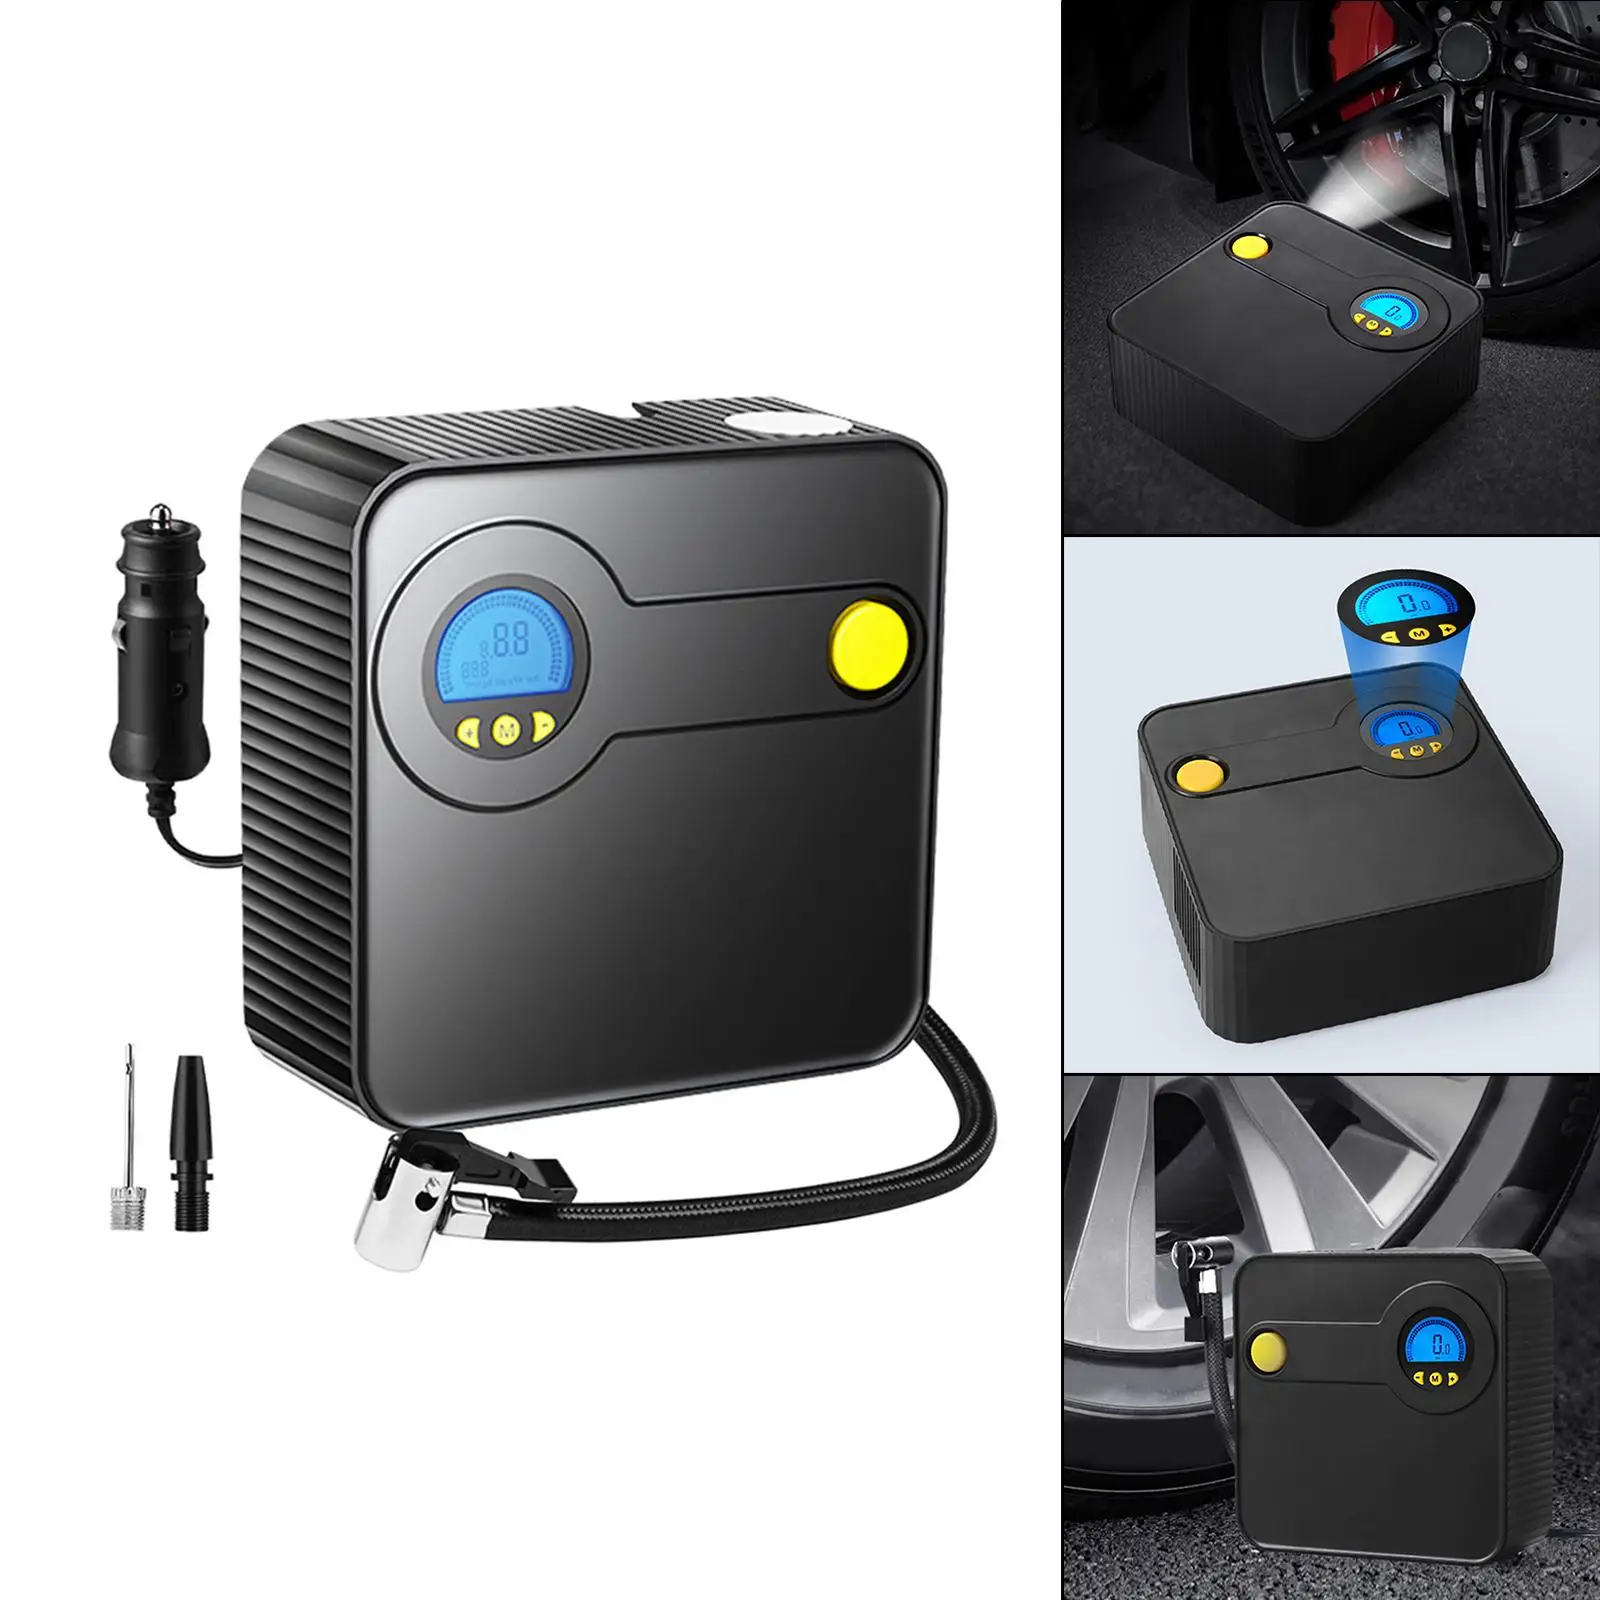 Car Air Compressor Tire Inflator Electric with LED Light Air Pump for Bicycle Inflatables Home